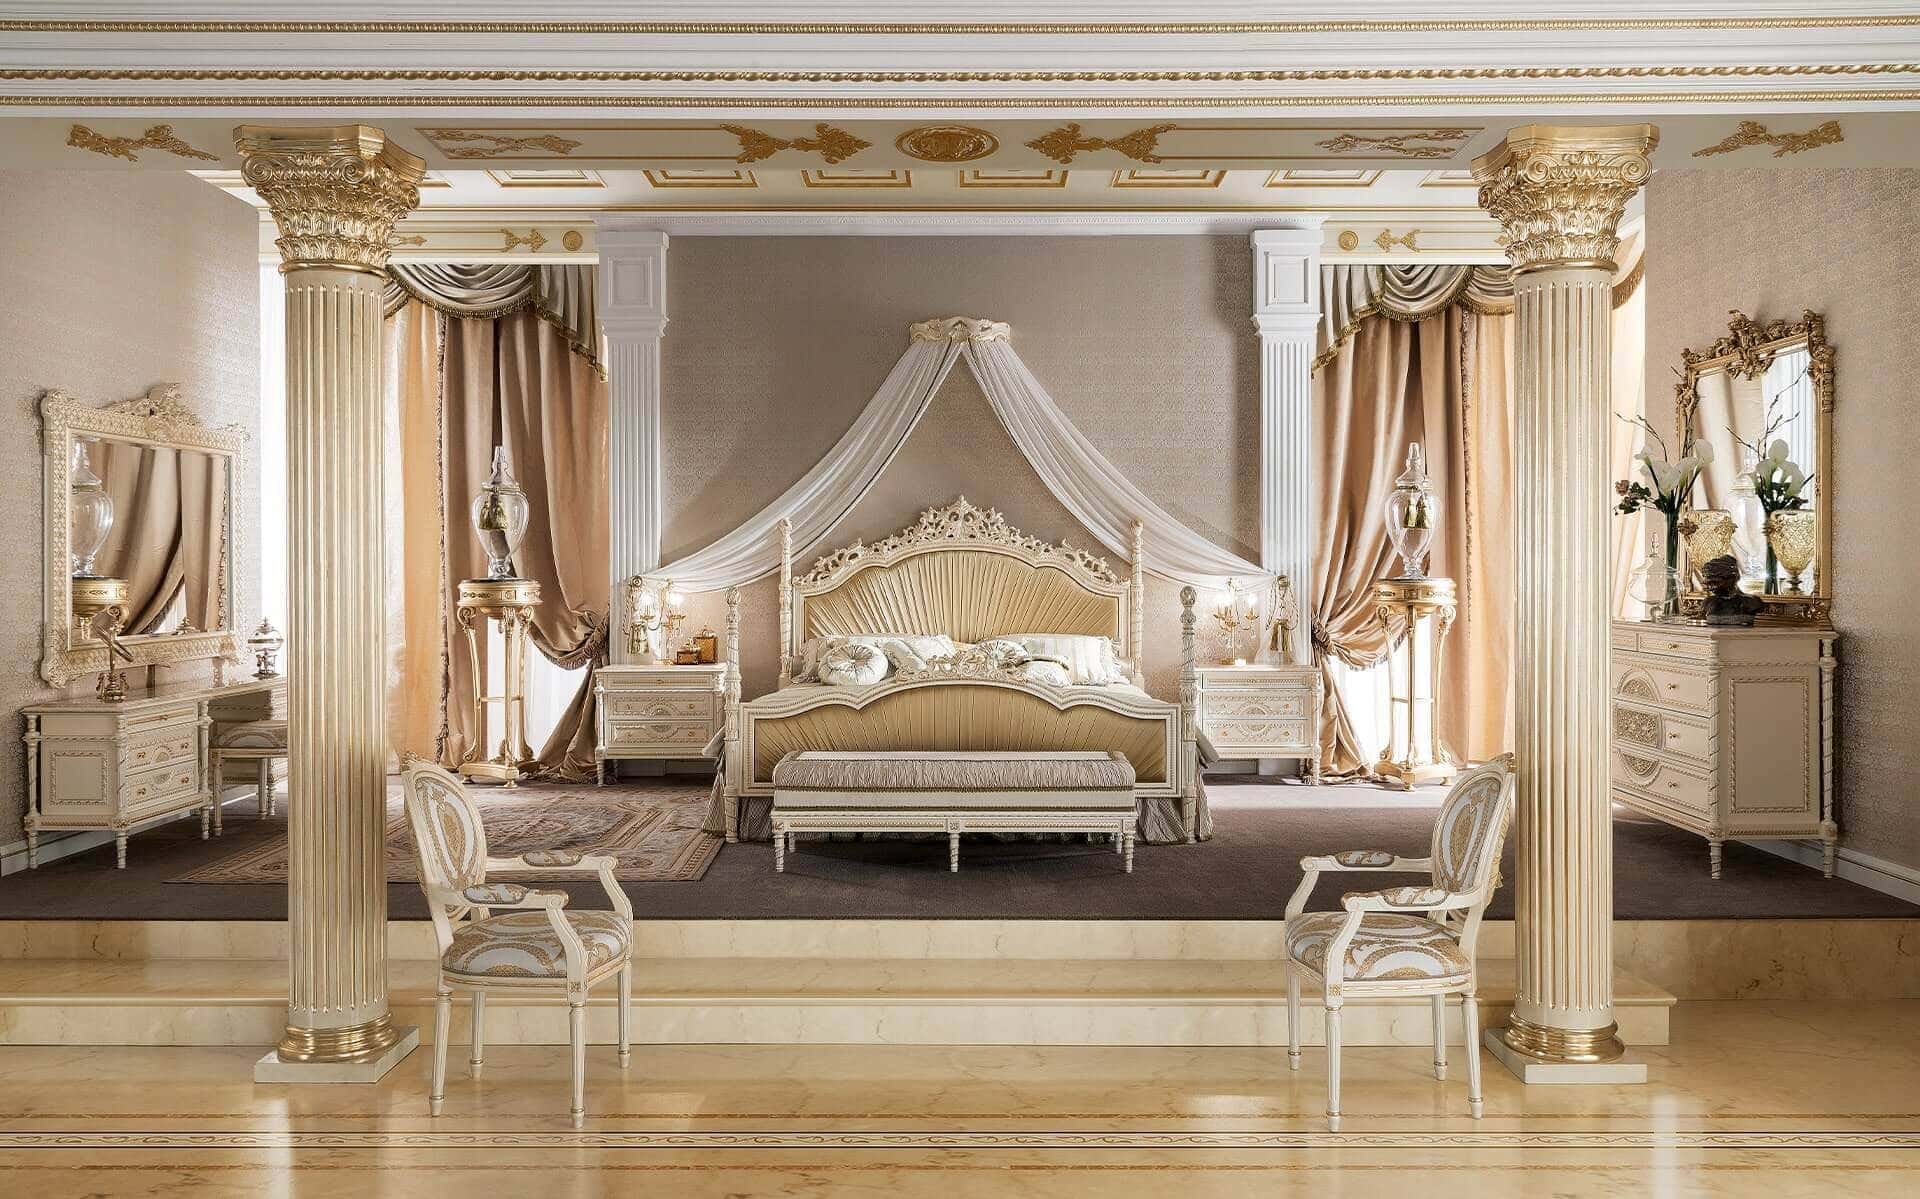 Made in Italy: 3 Of The Best Italian Luxury Items to Buy for Your Home